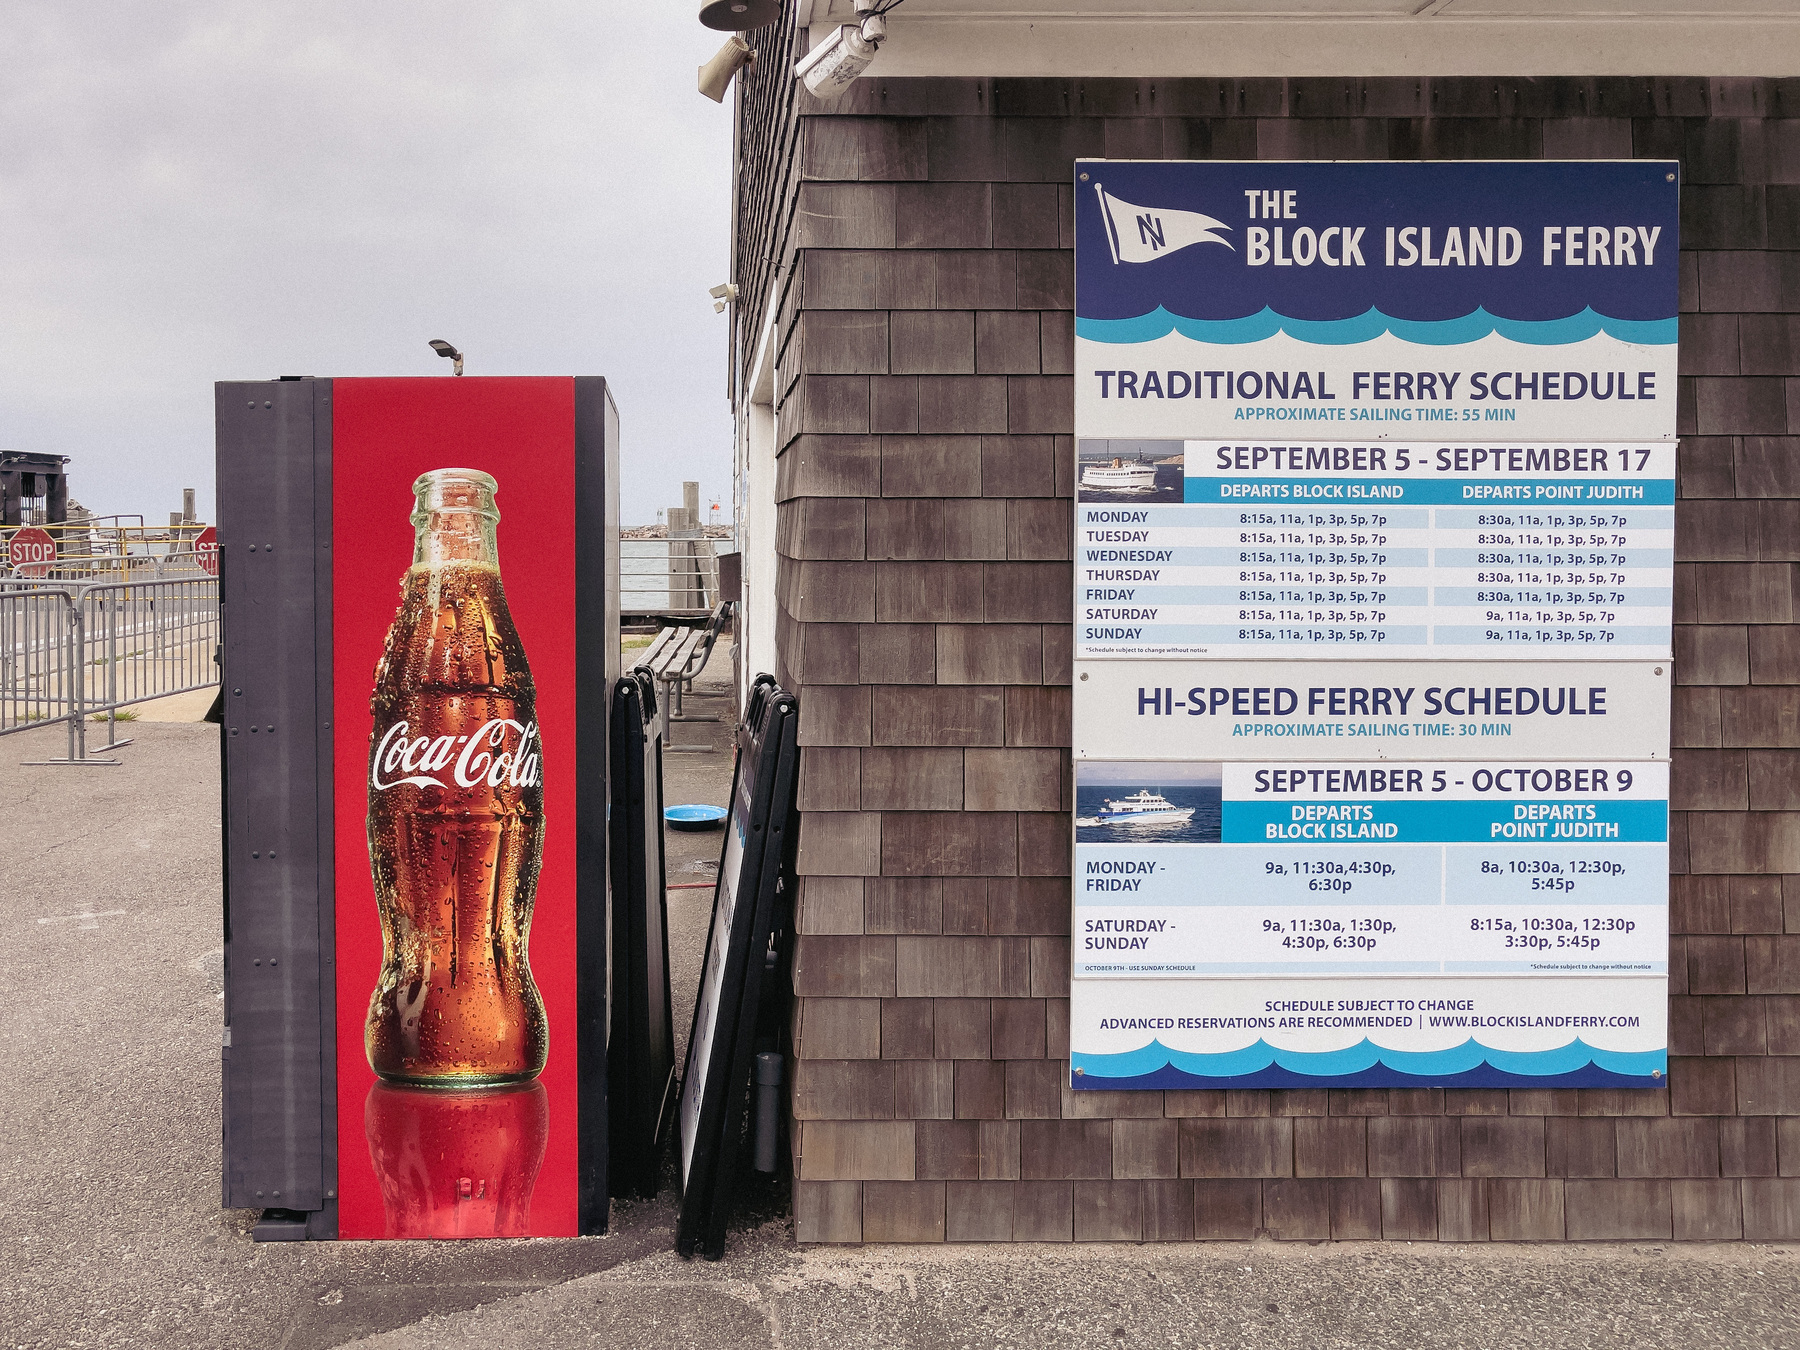 Coke vending machine with large image of a bottle of coke standing next to a building with Block Island Ferry schedule on its side.